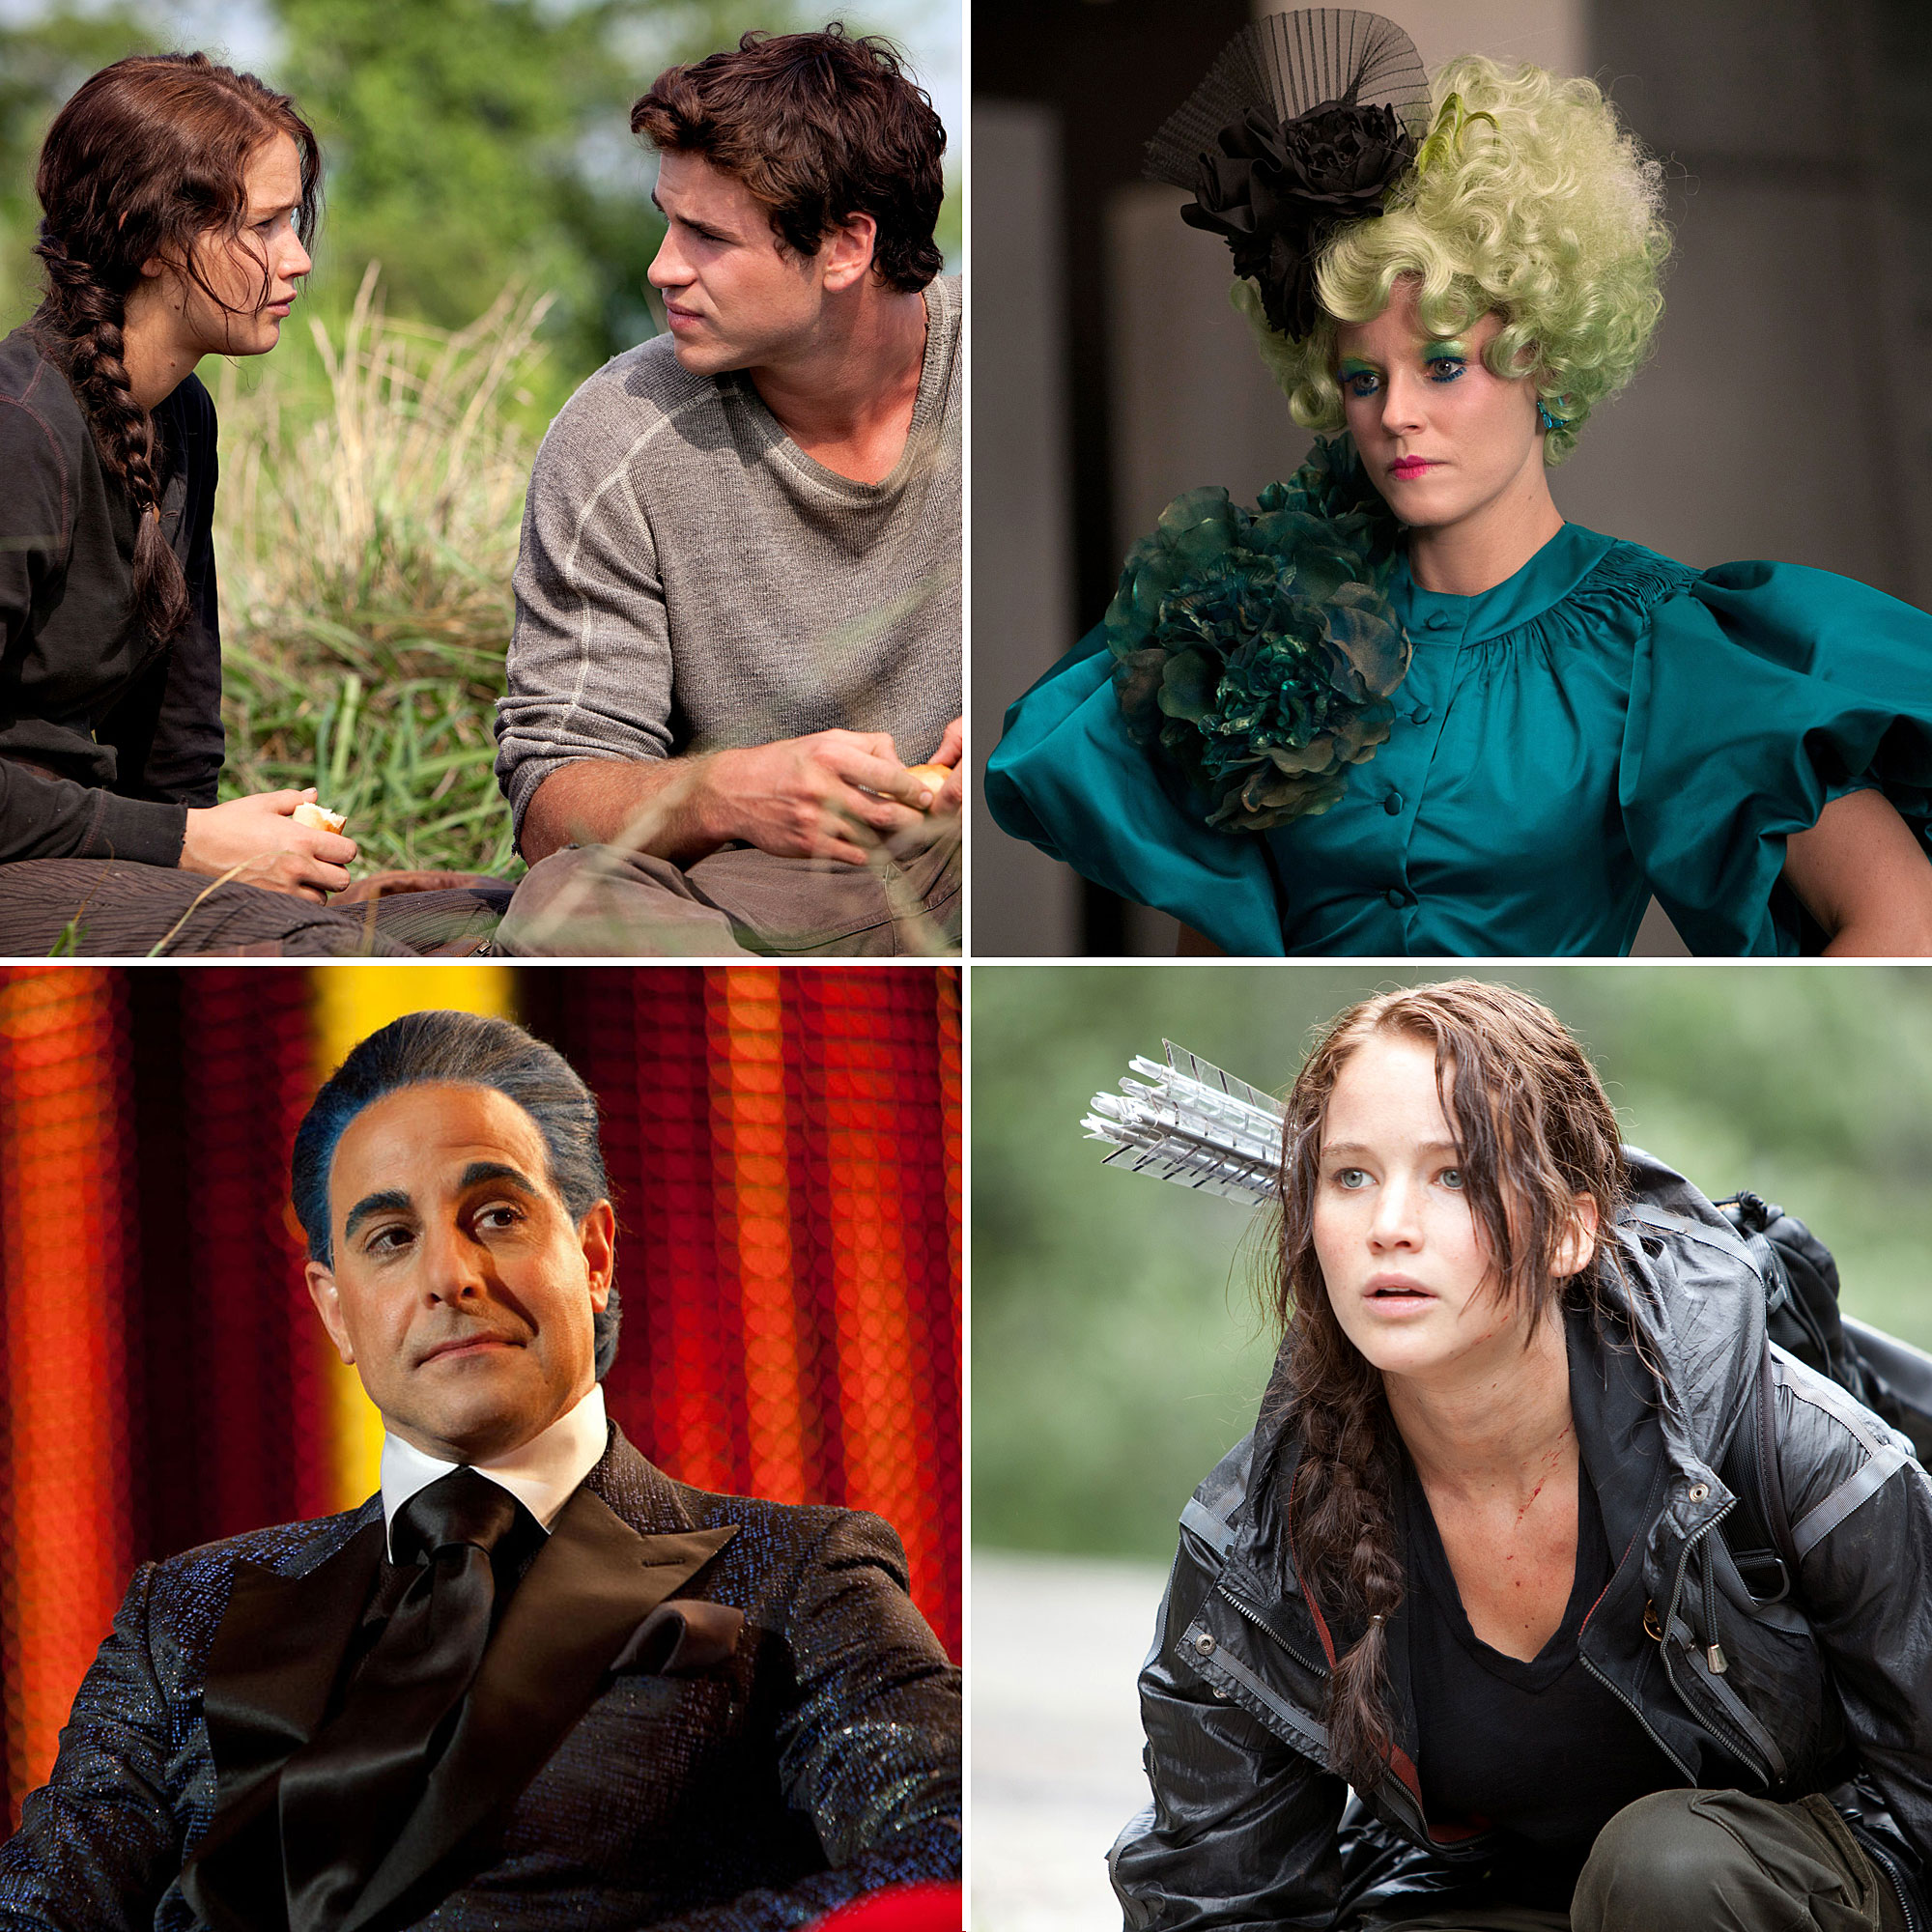 The Hunger Games - The Hunger Games